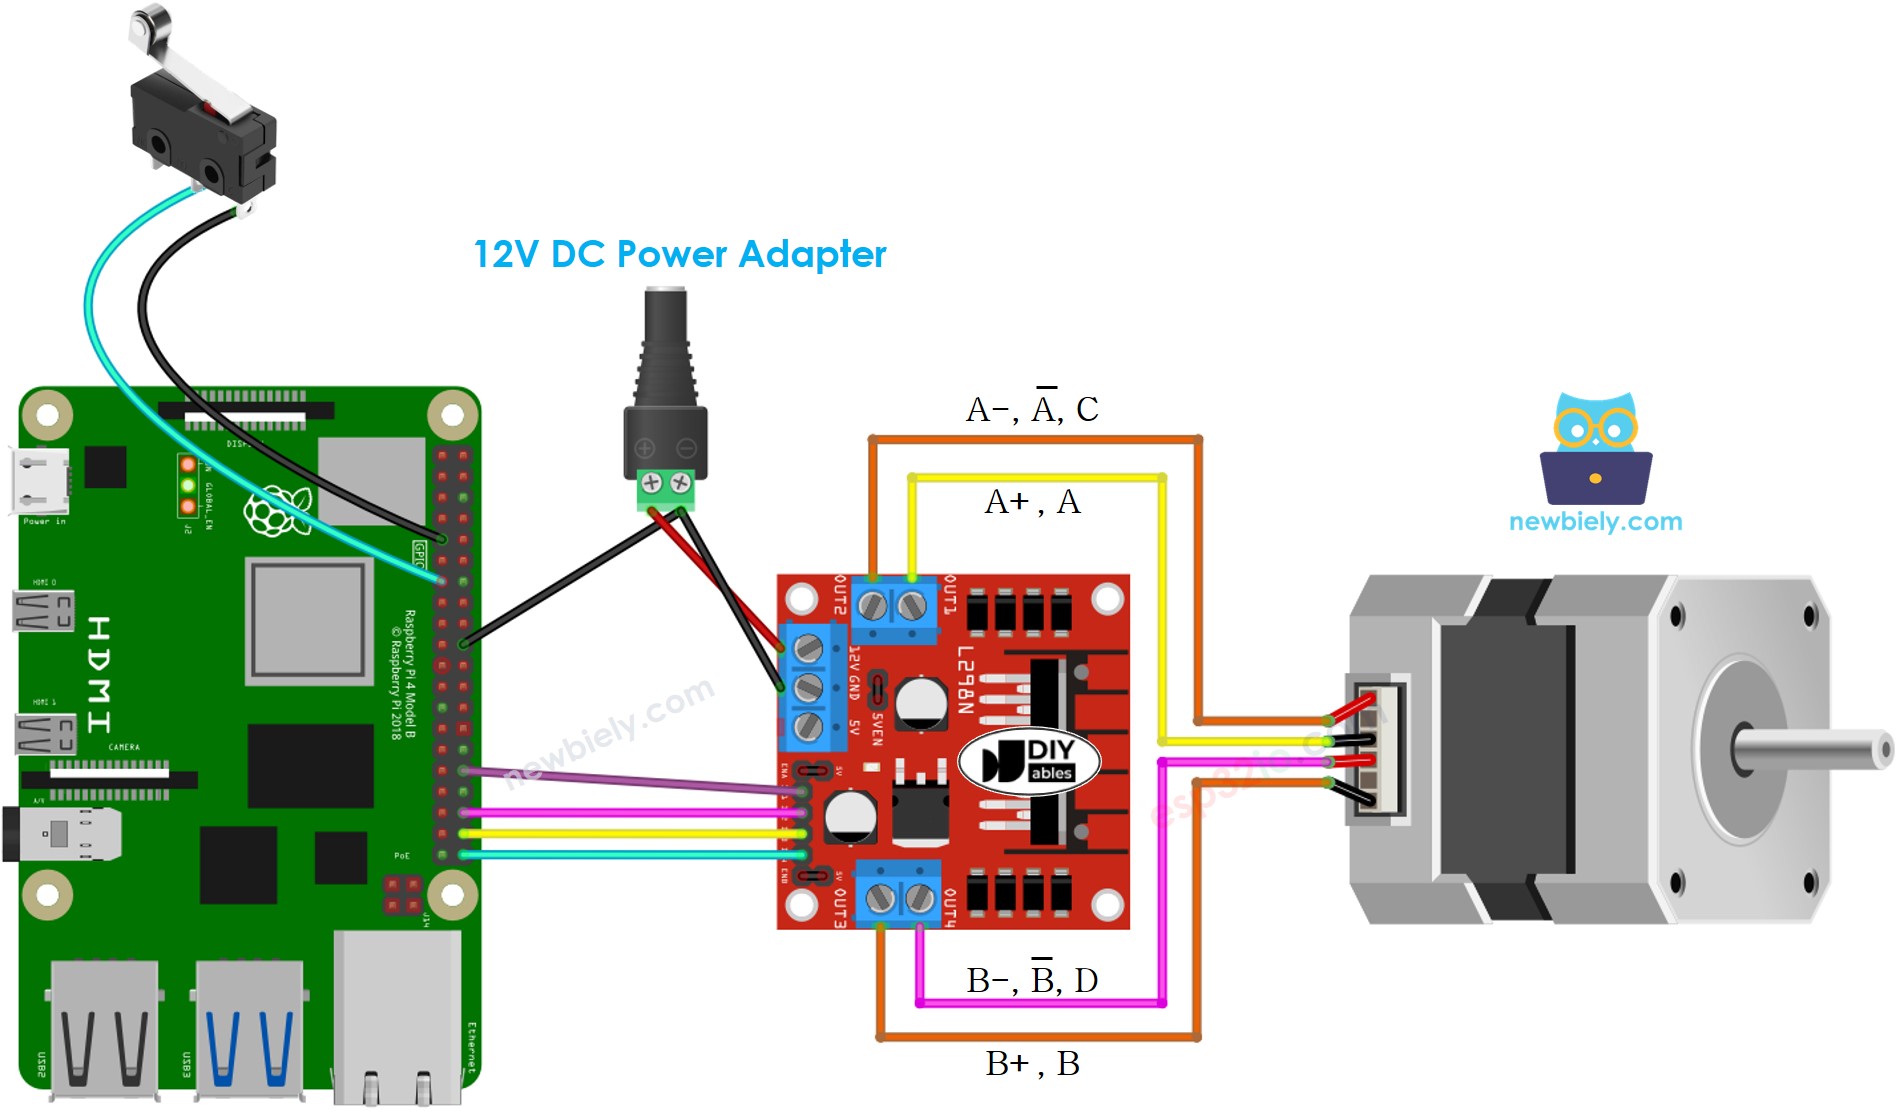 The wiring diagram between Raspberry Pi and stepper motor and limit switch